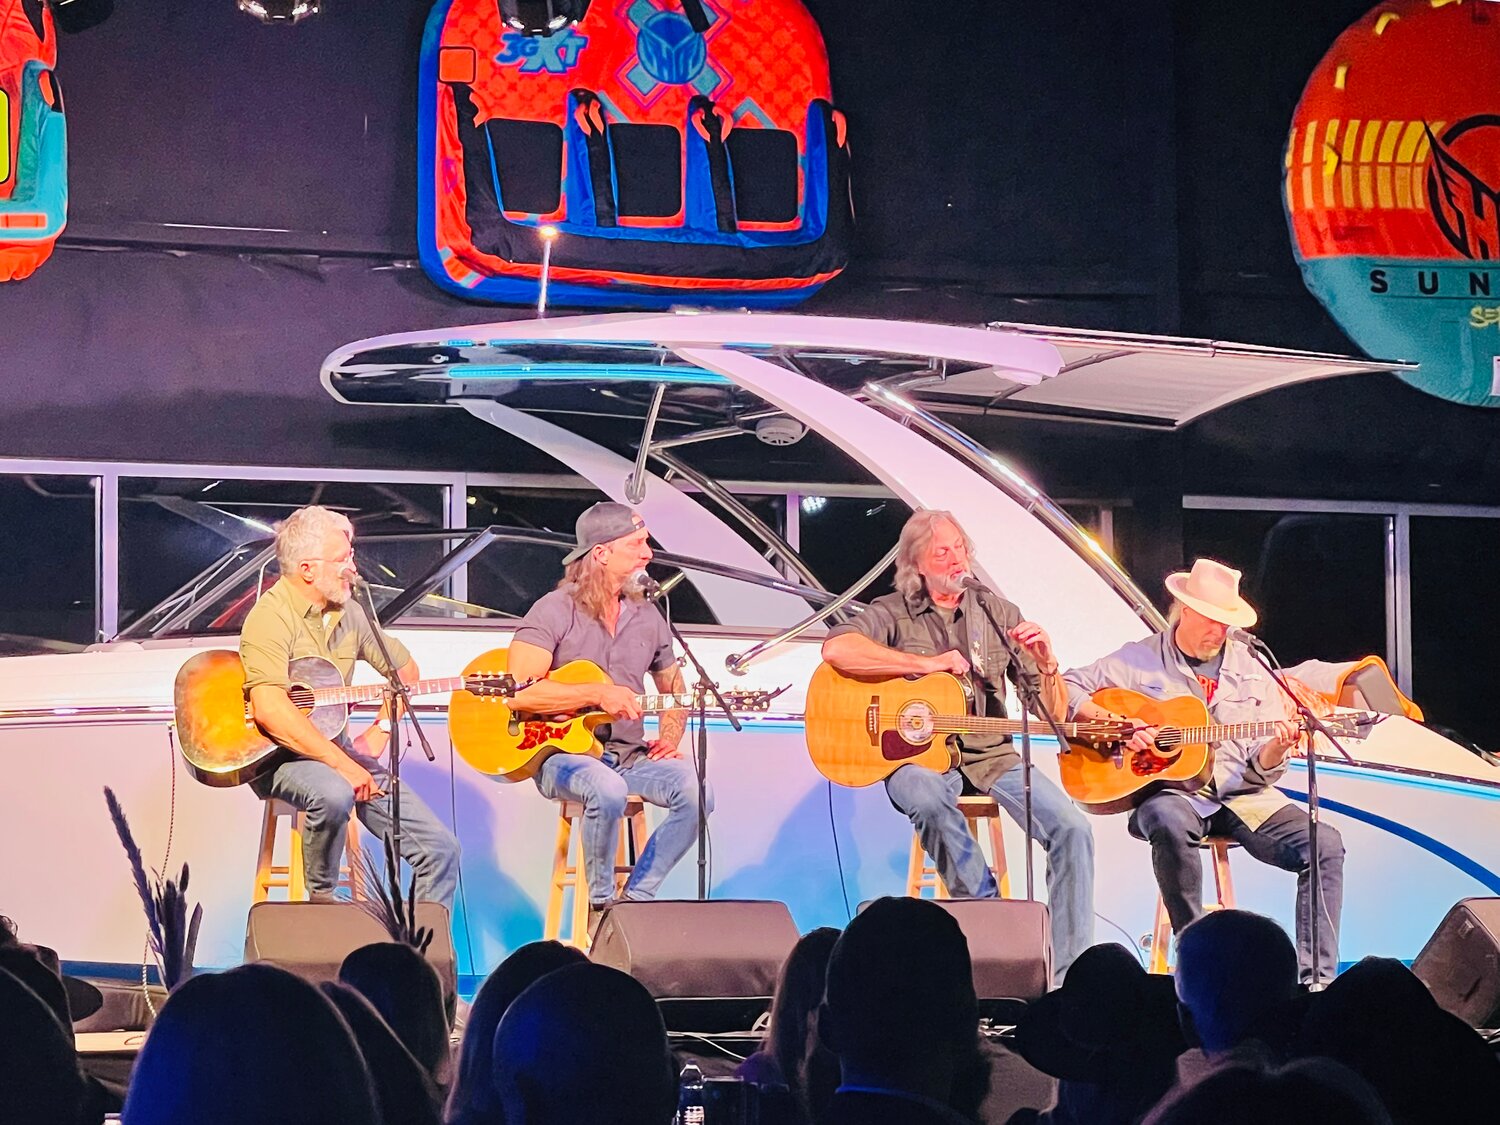 Pictured Above from Left to Right:  The Warren Brothers (Brett and Brad Warren), Darryl Worley, and Jim “Moose” Brown